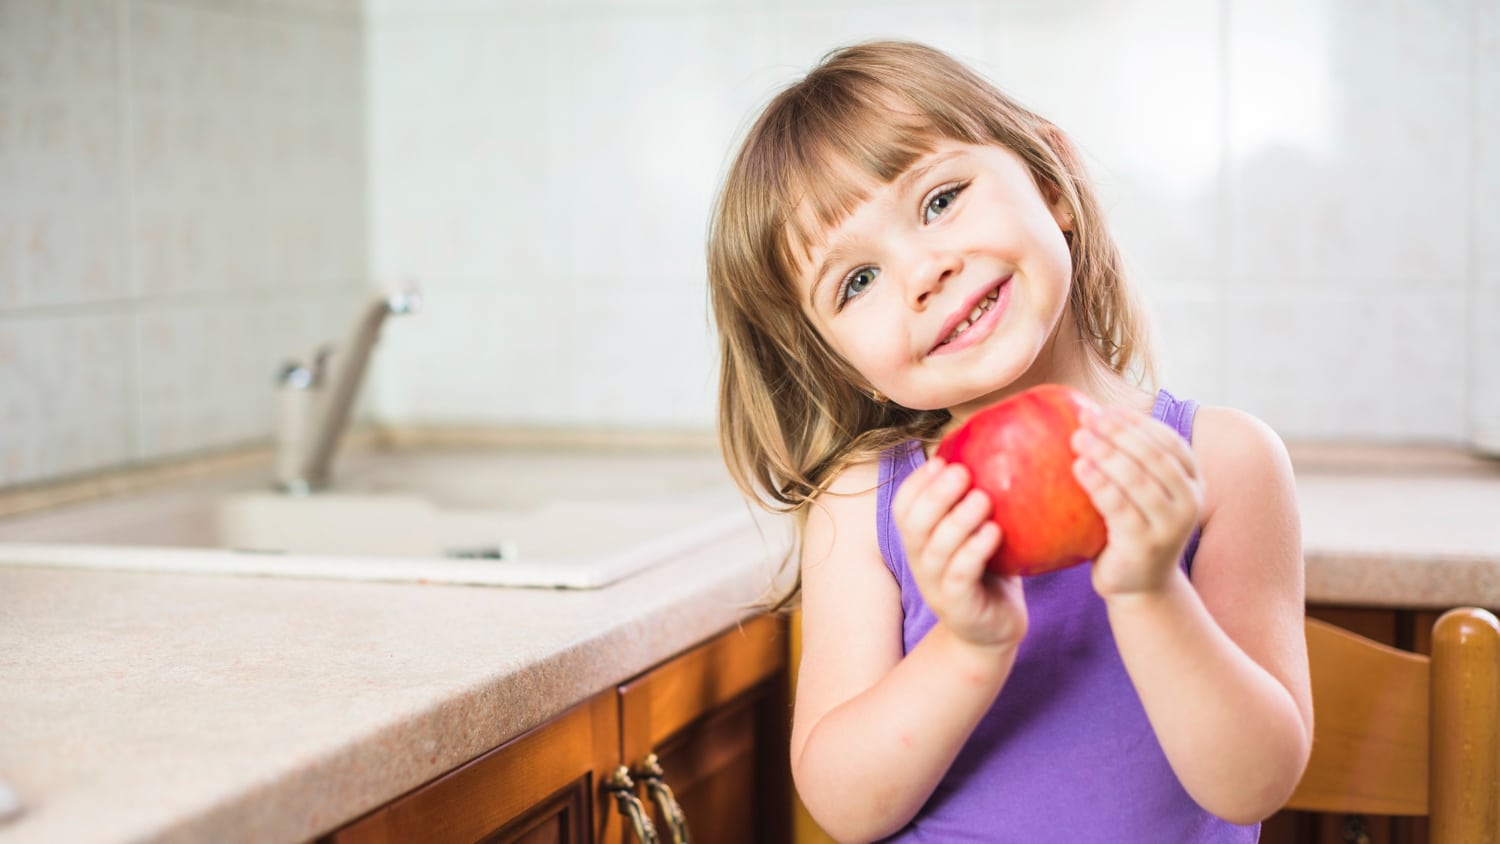 Nutrition for Building Healthy Smiles